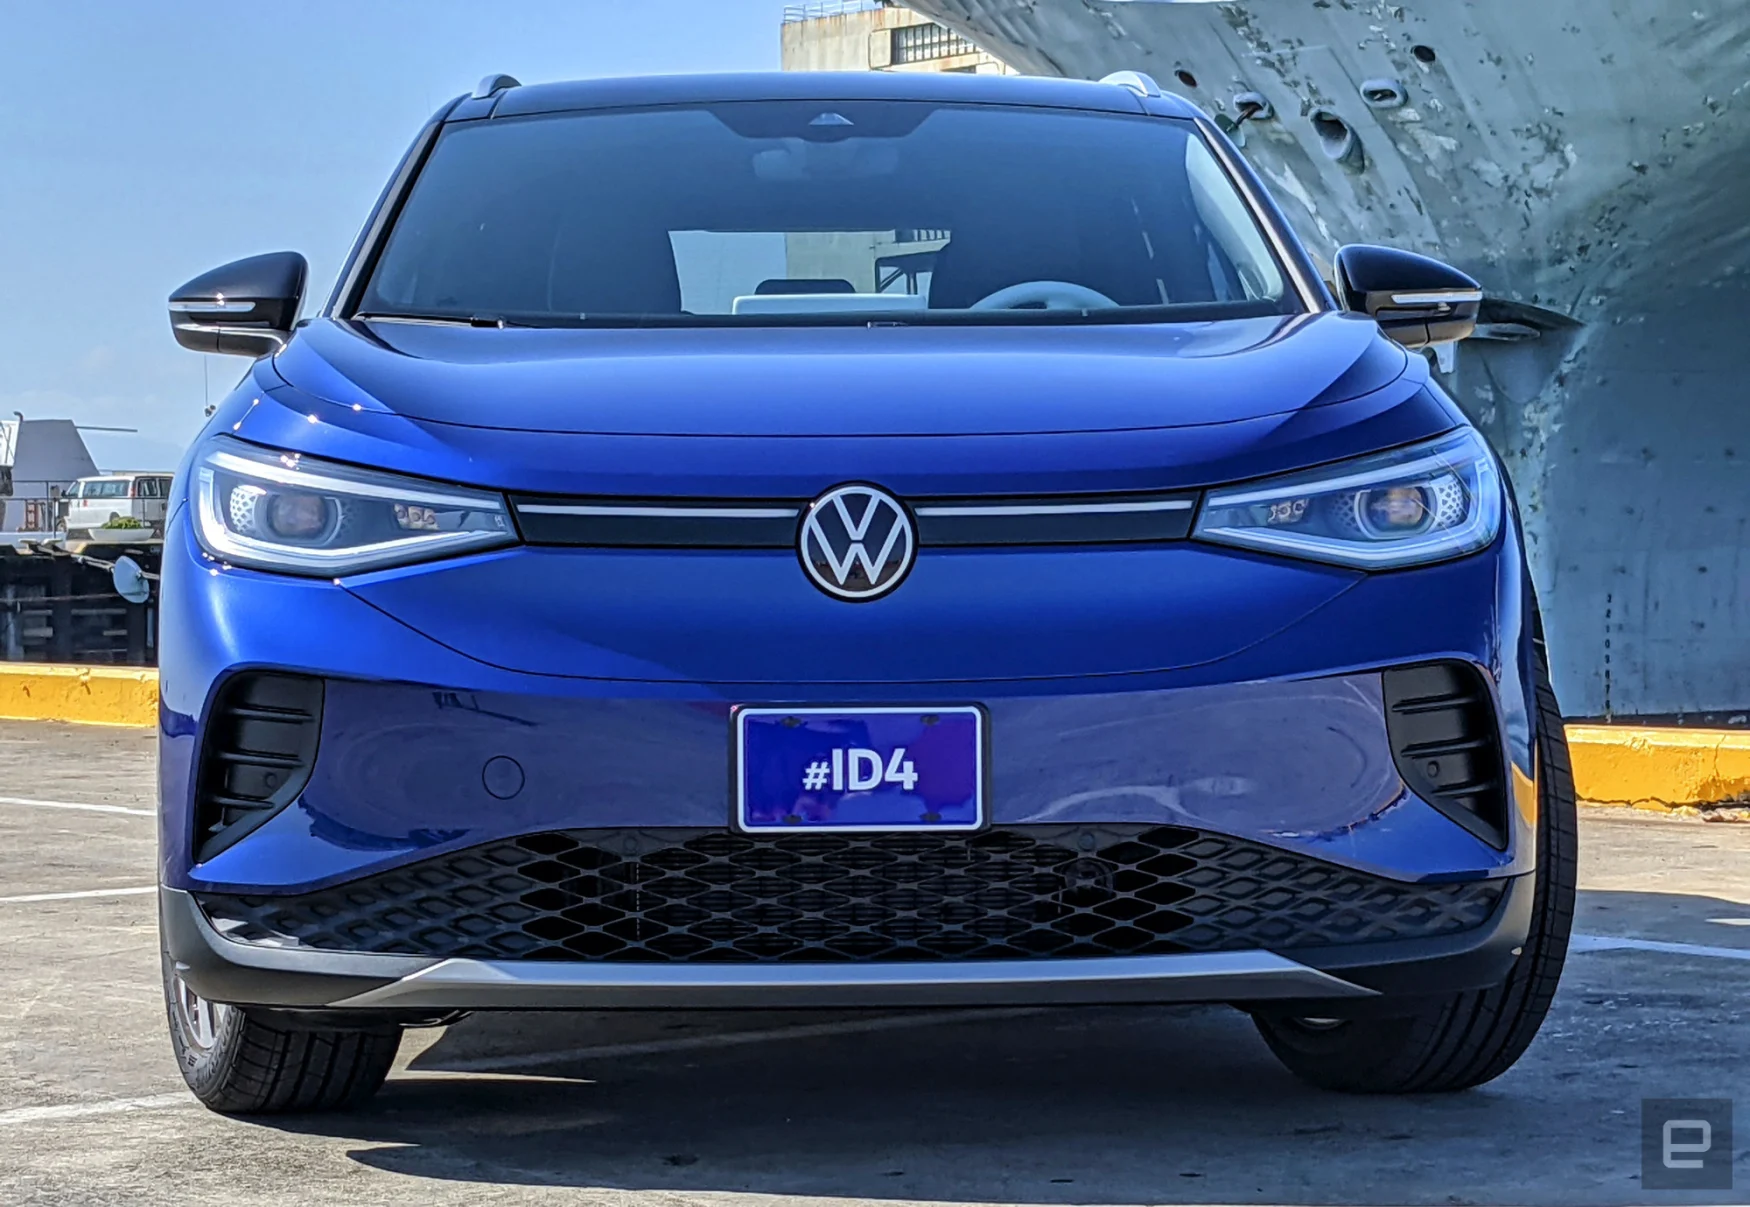 A blue Volkswagen ID.4 EV is parked in a lot right next to San Francisco docks with military ships.